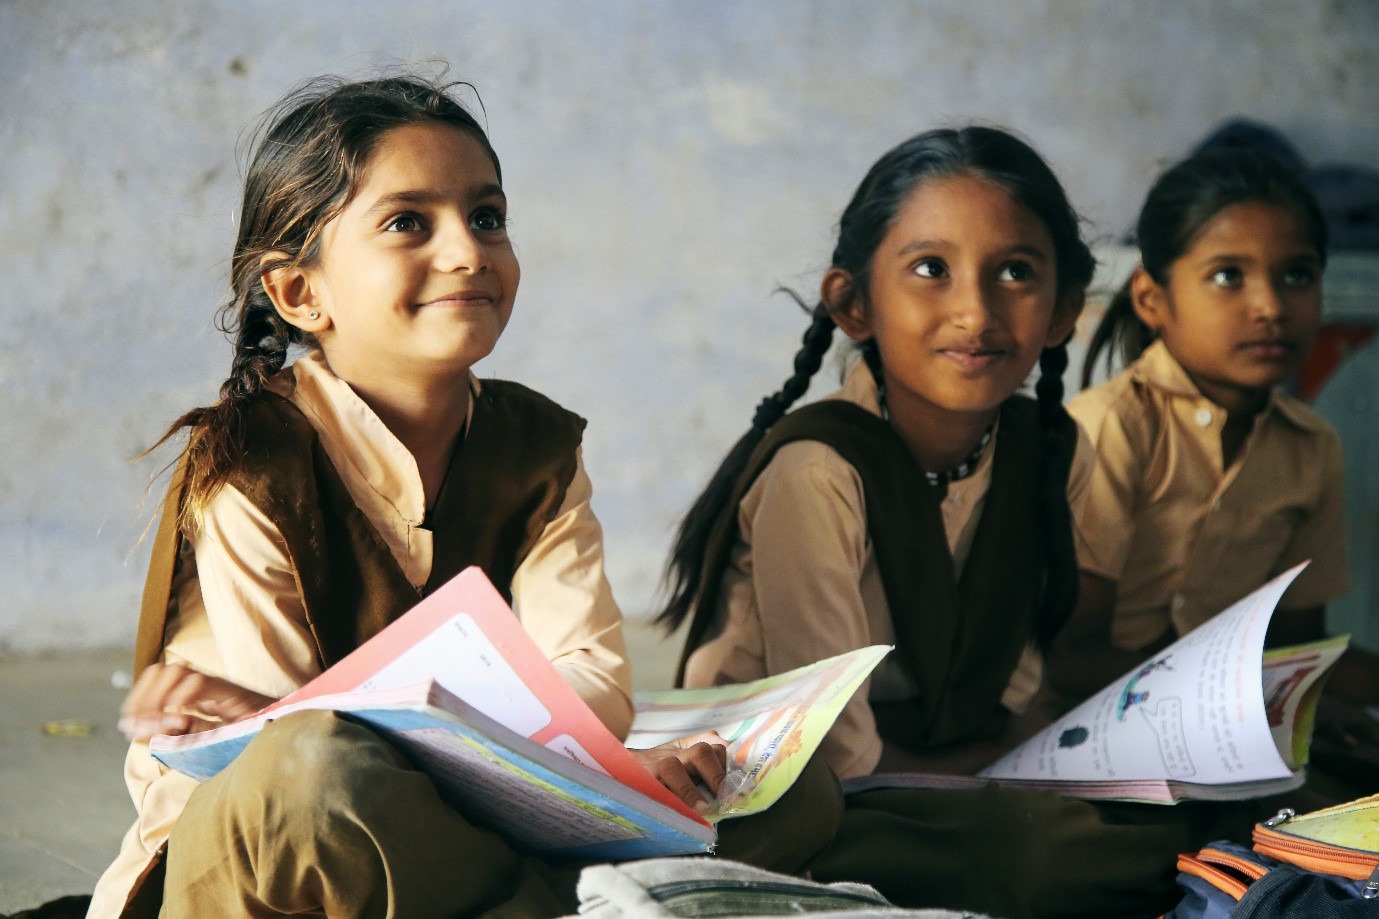 Three young Indian school pupils sitting on the floor with text books on their laps